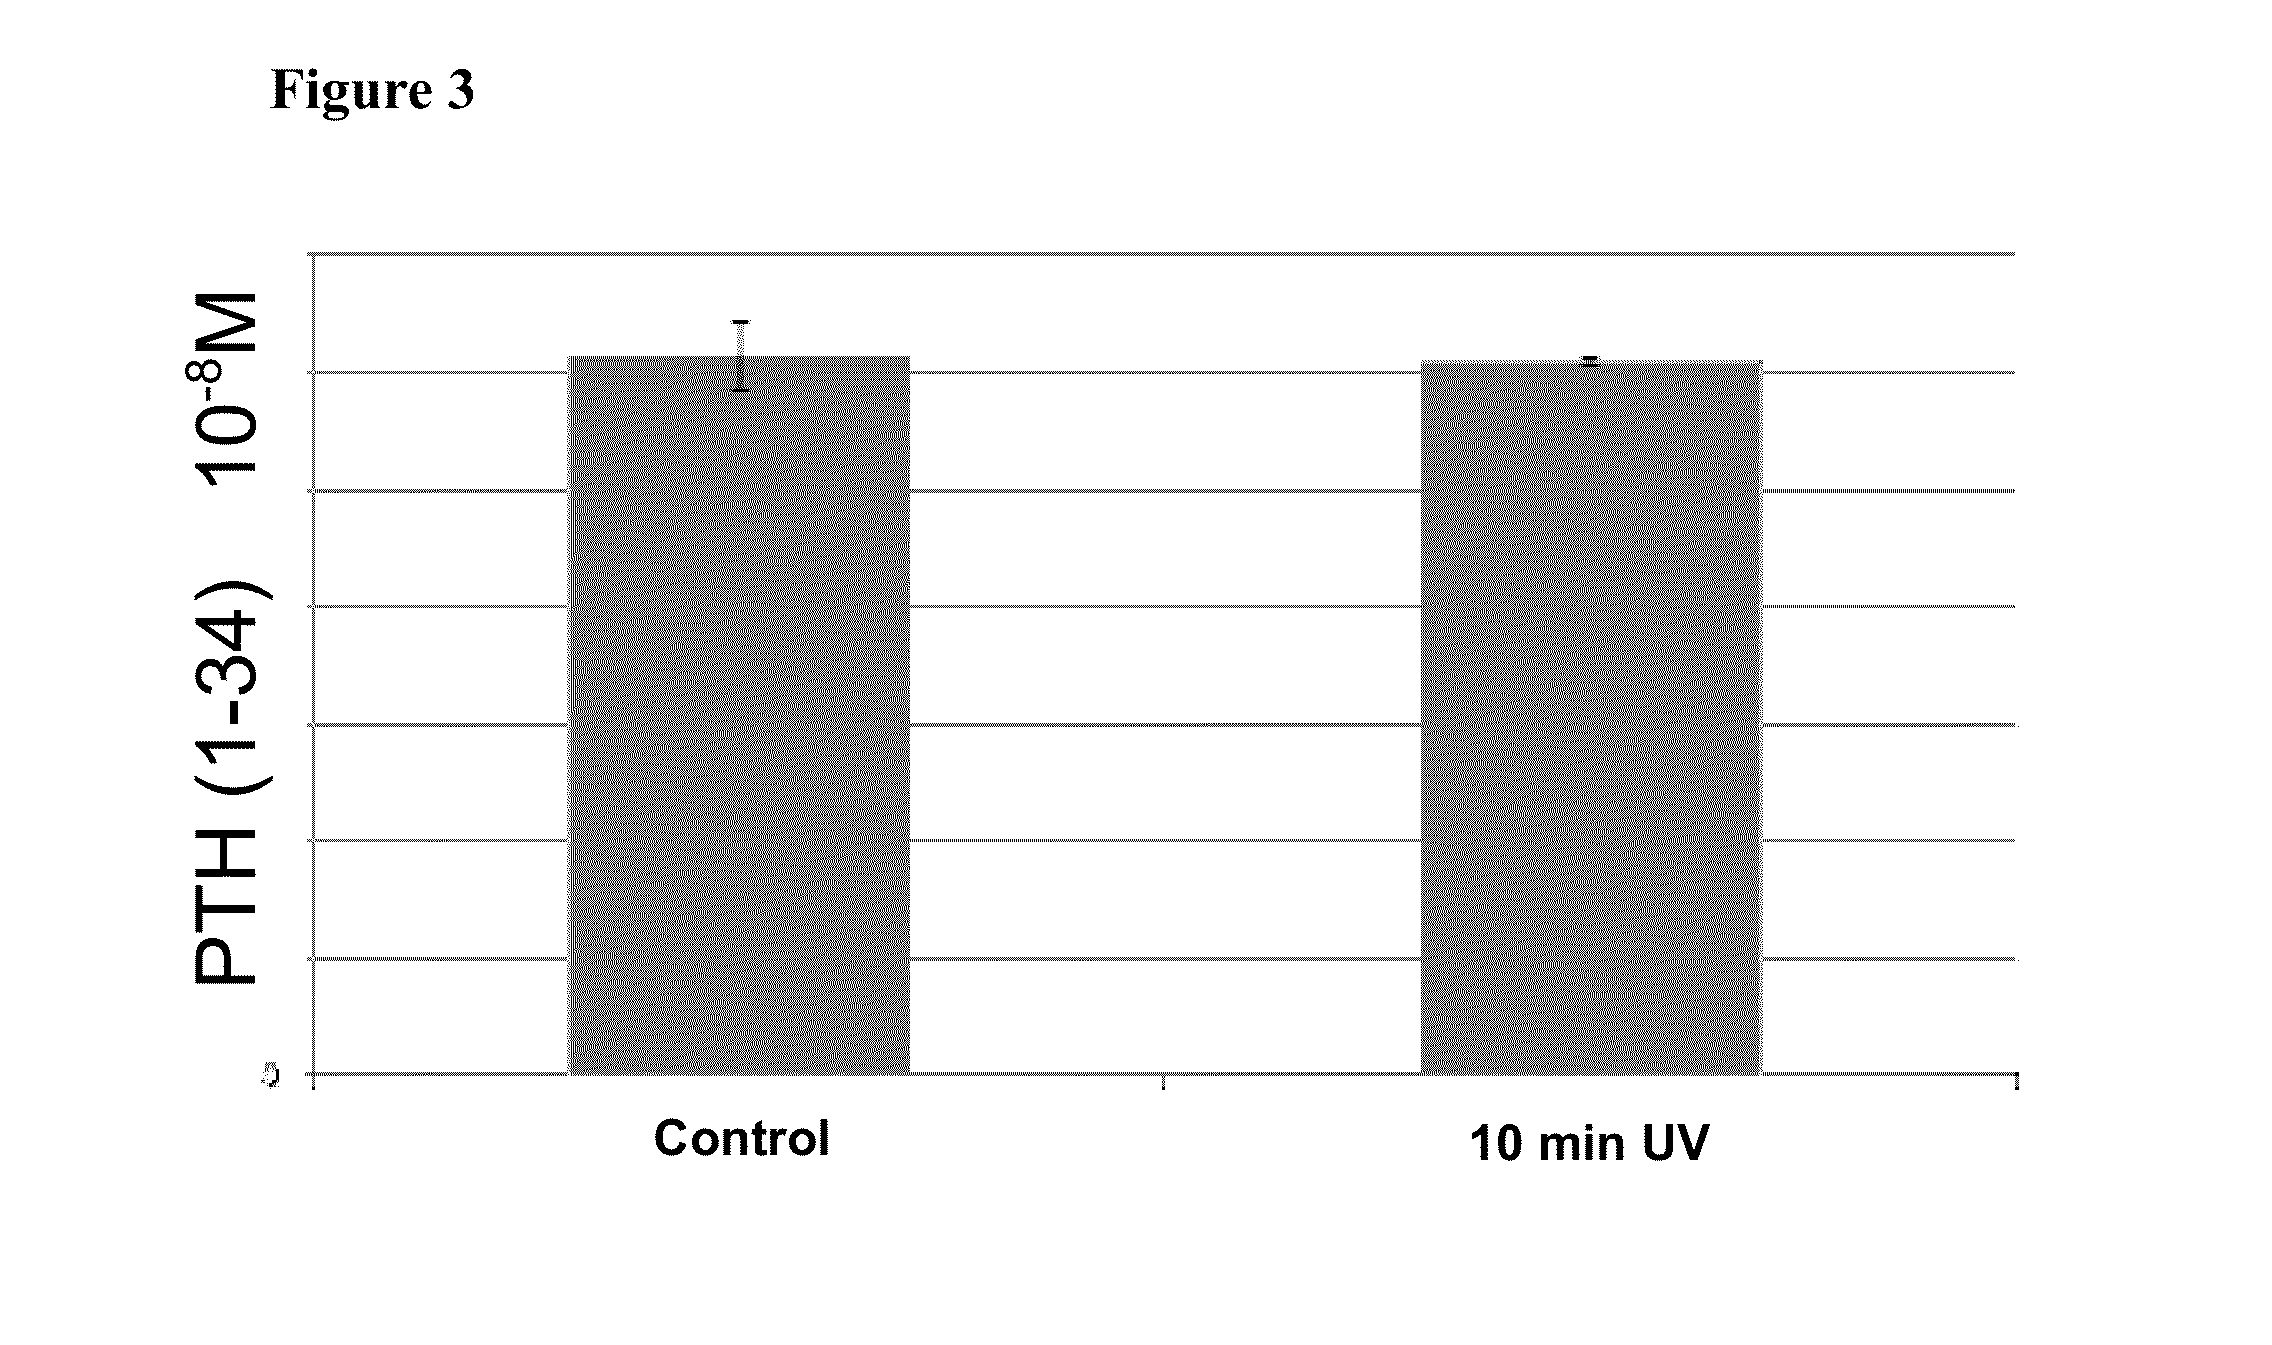 Method for controlled release of parathyroid hormone from cross-linked hyaluronic acid hydrogel